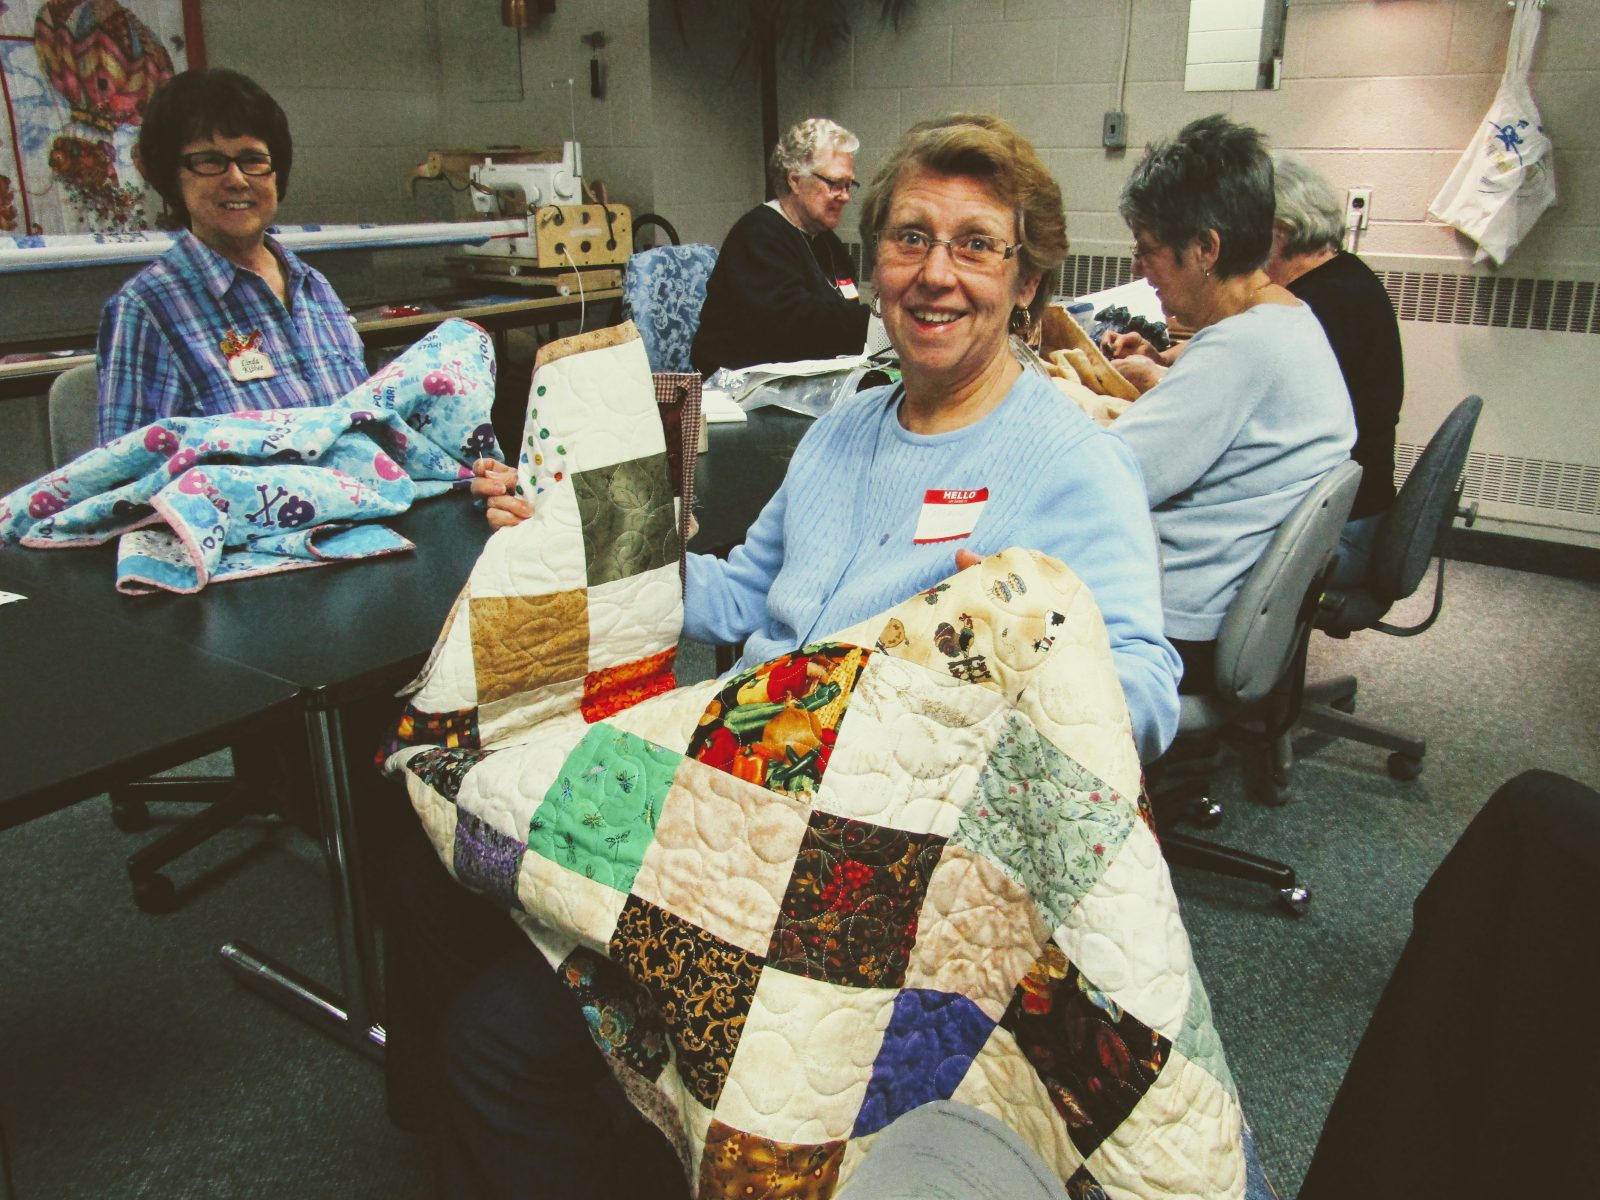 Comfort Quilts spreads warmth for cancer patients